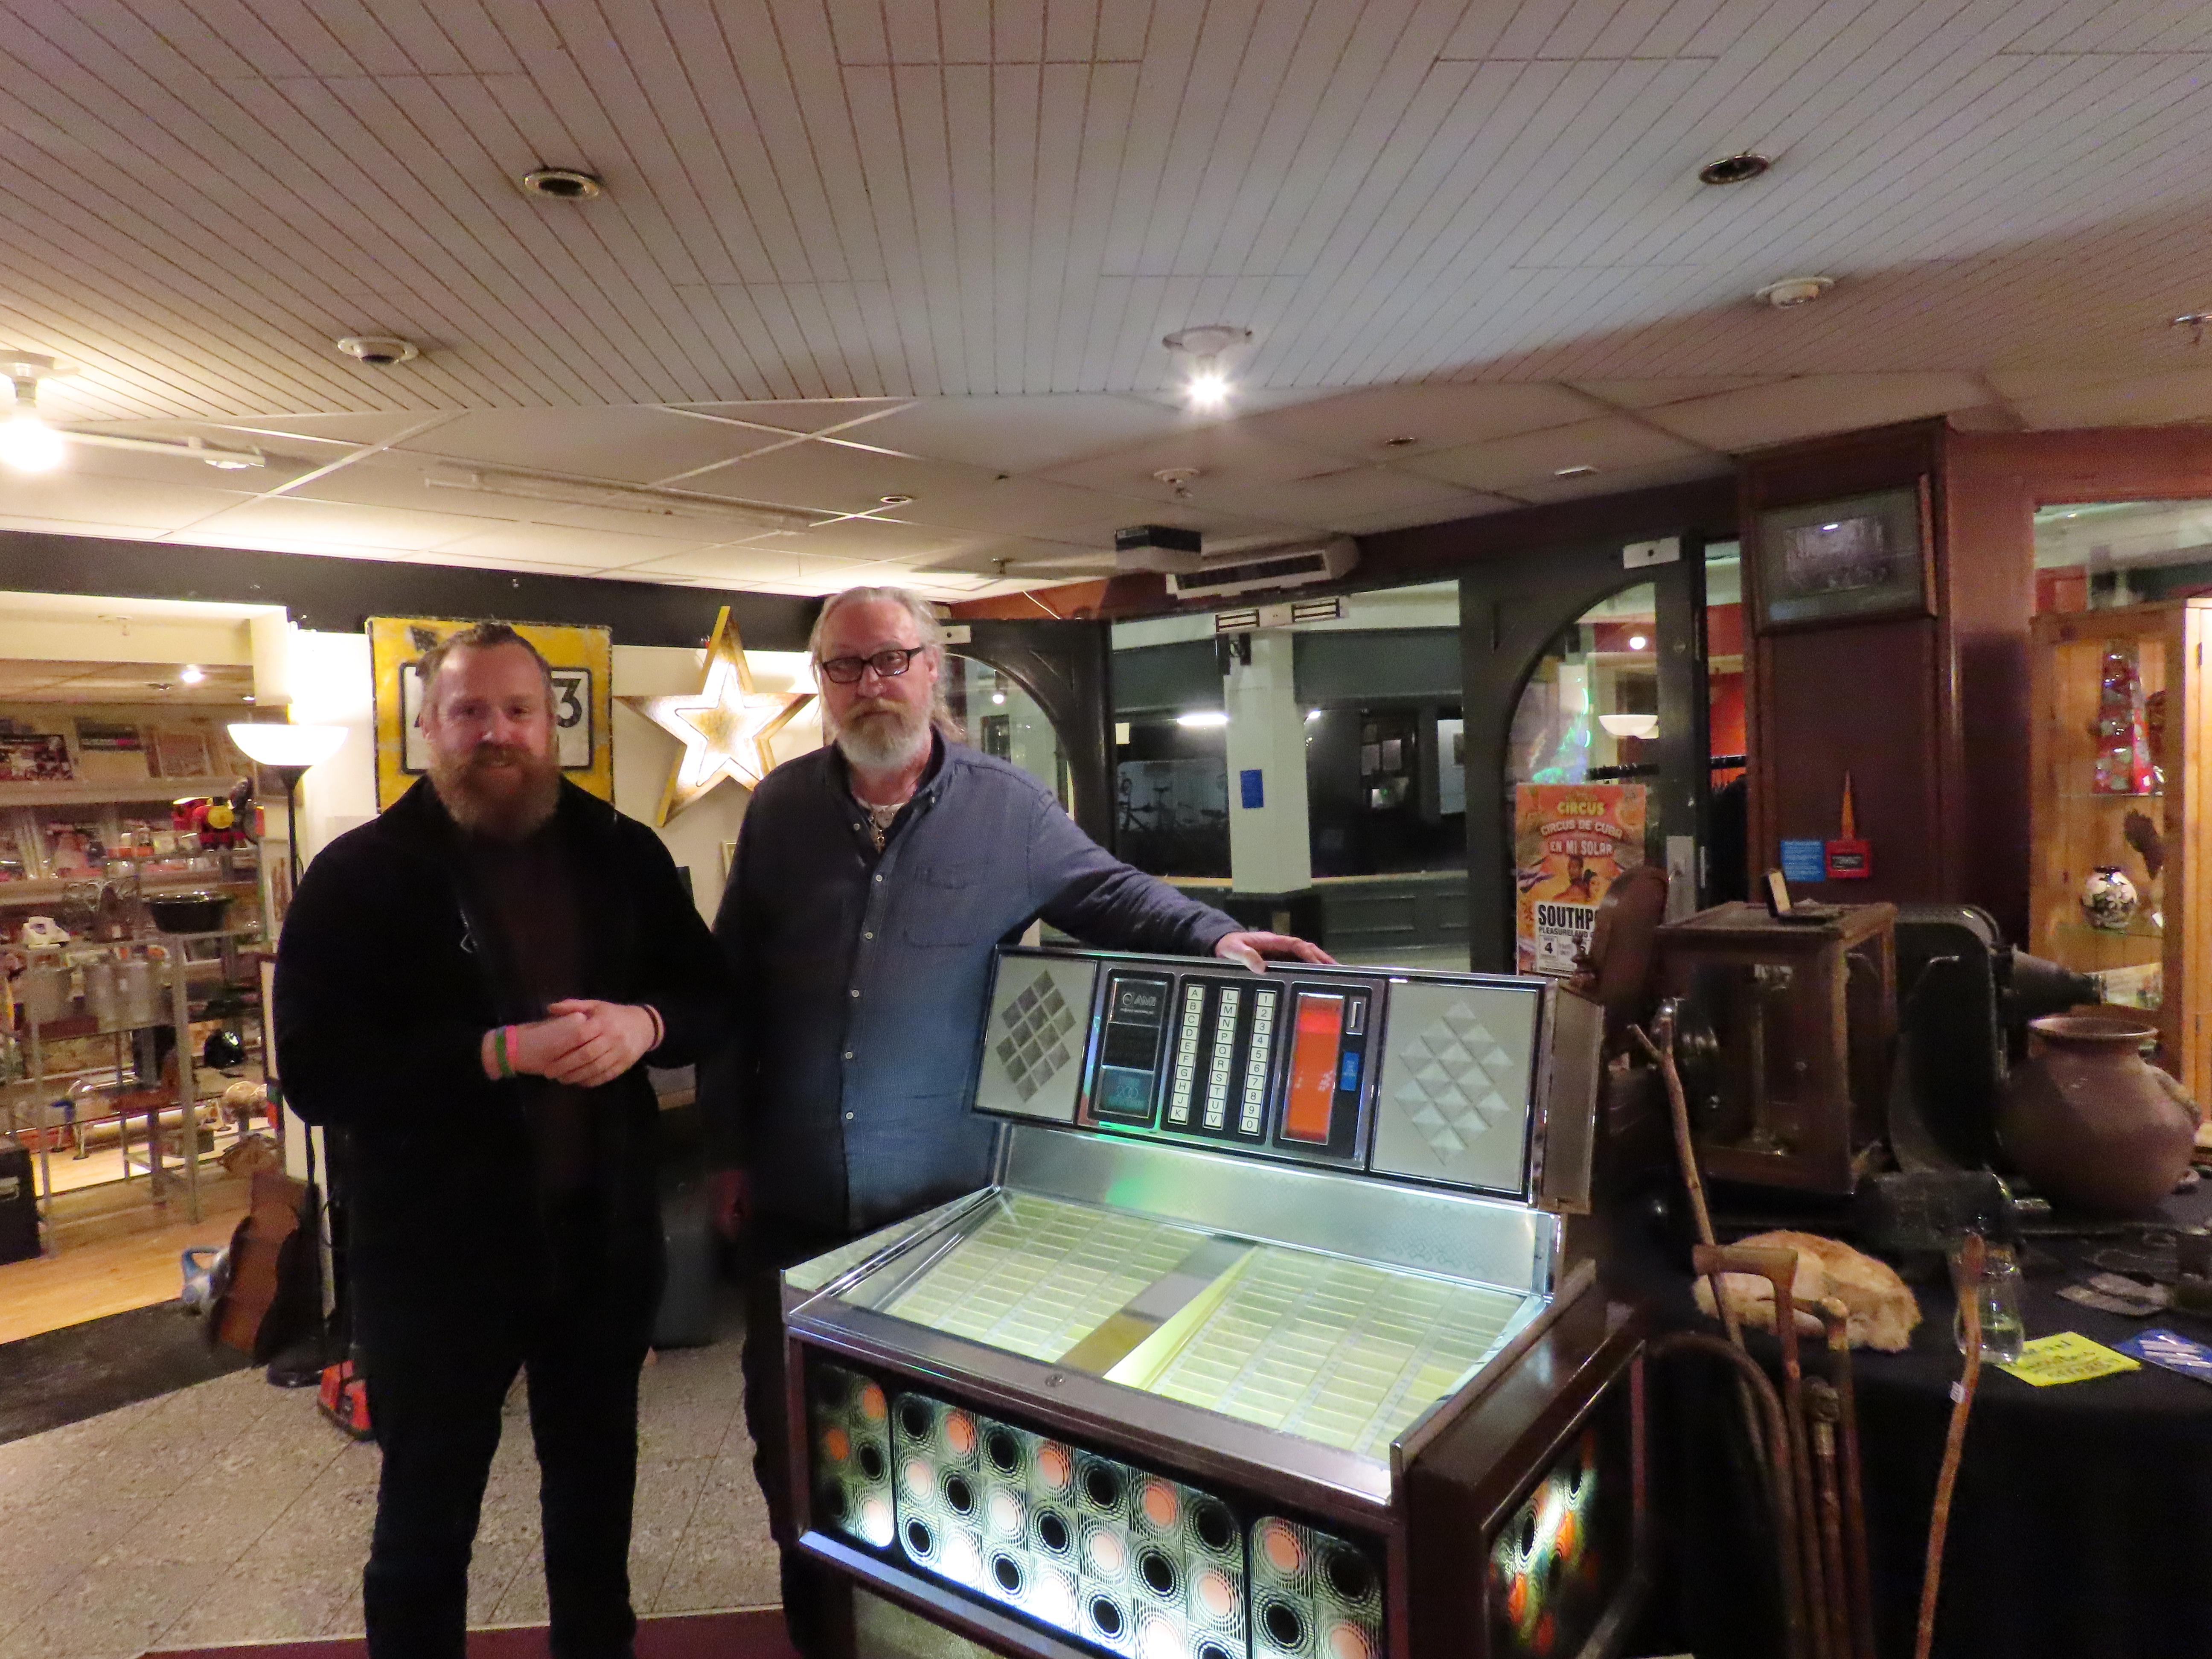 Danny Howard (left) and John Savage (right) at MIH Bazaar in Southport.